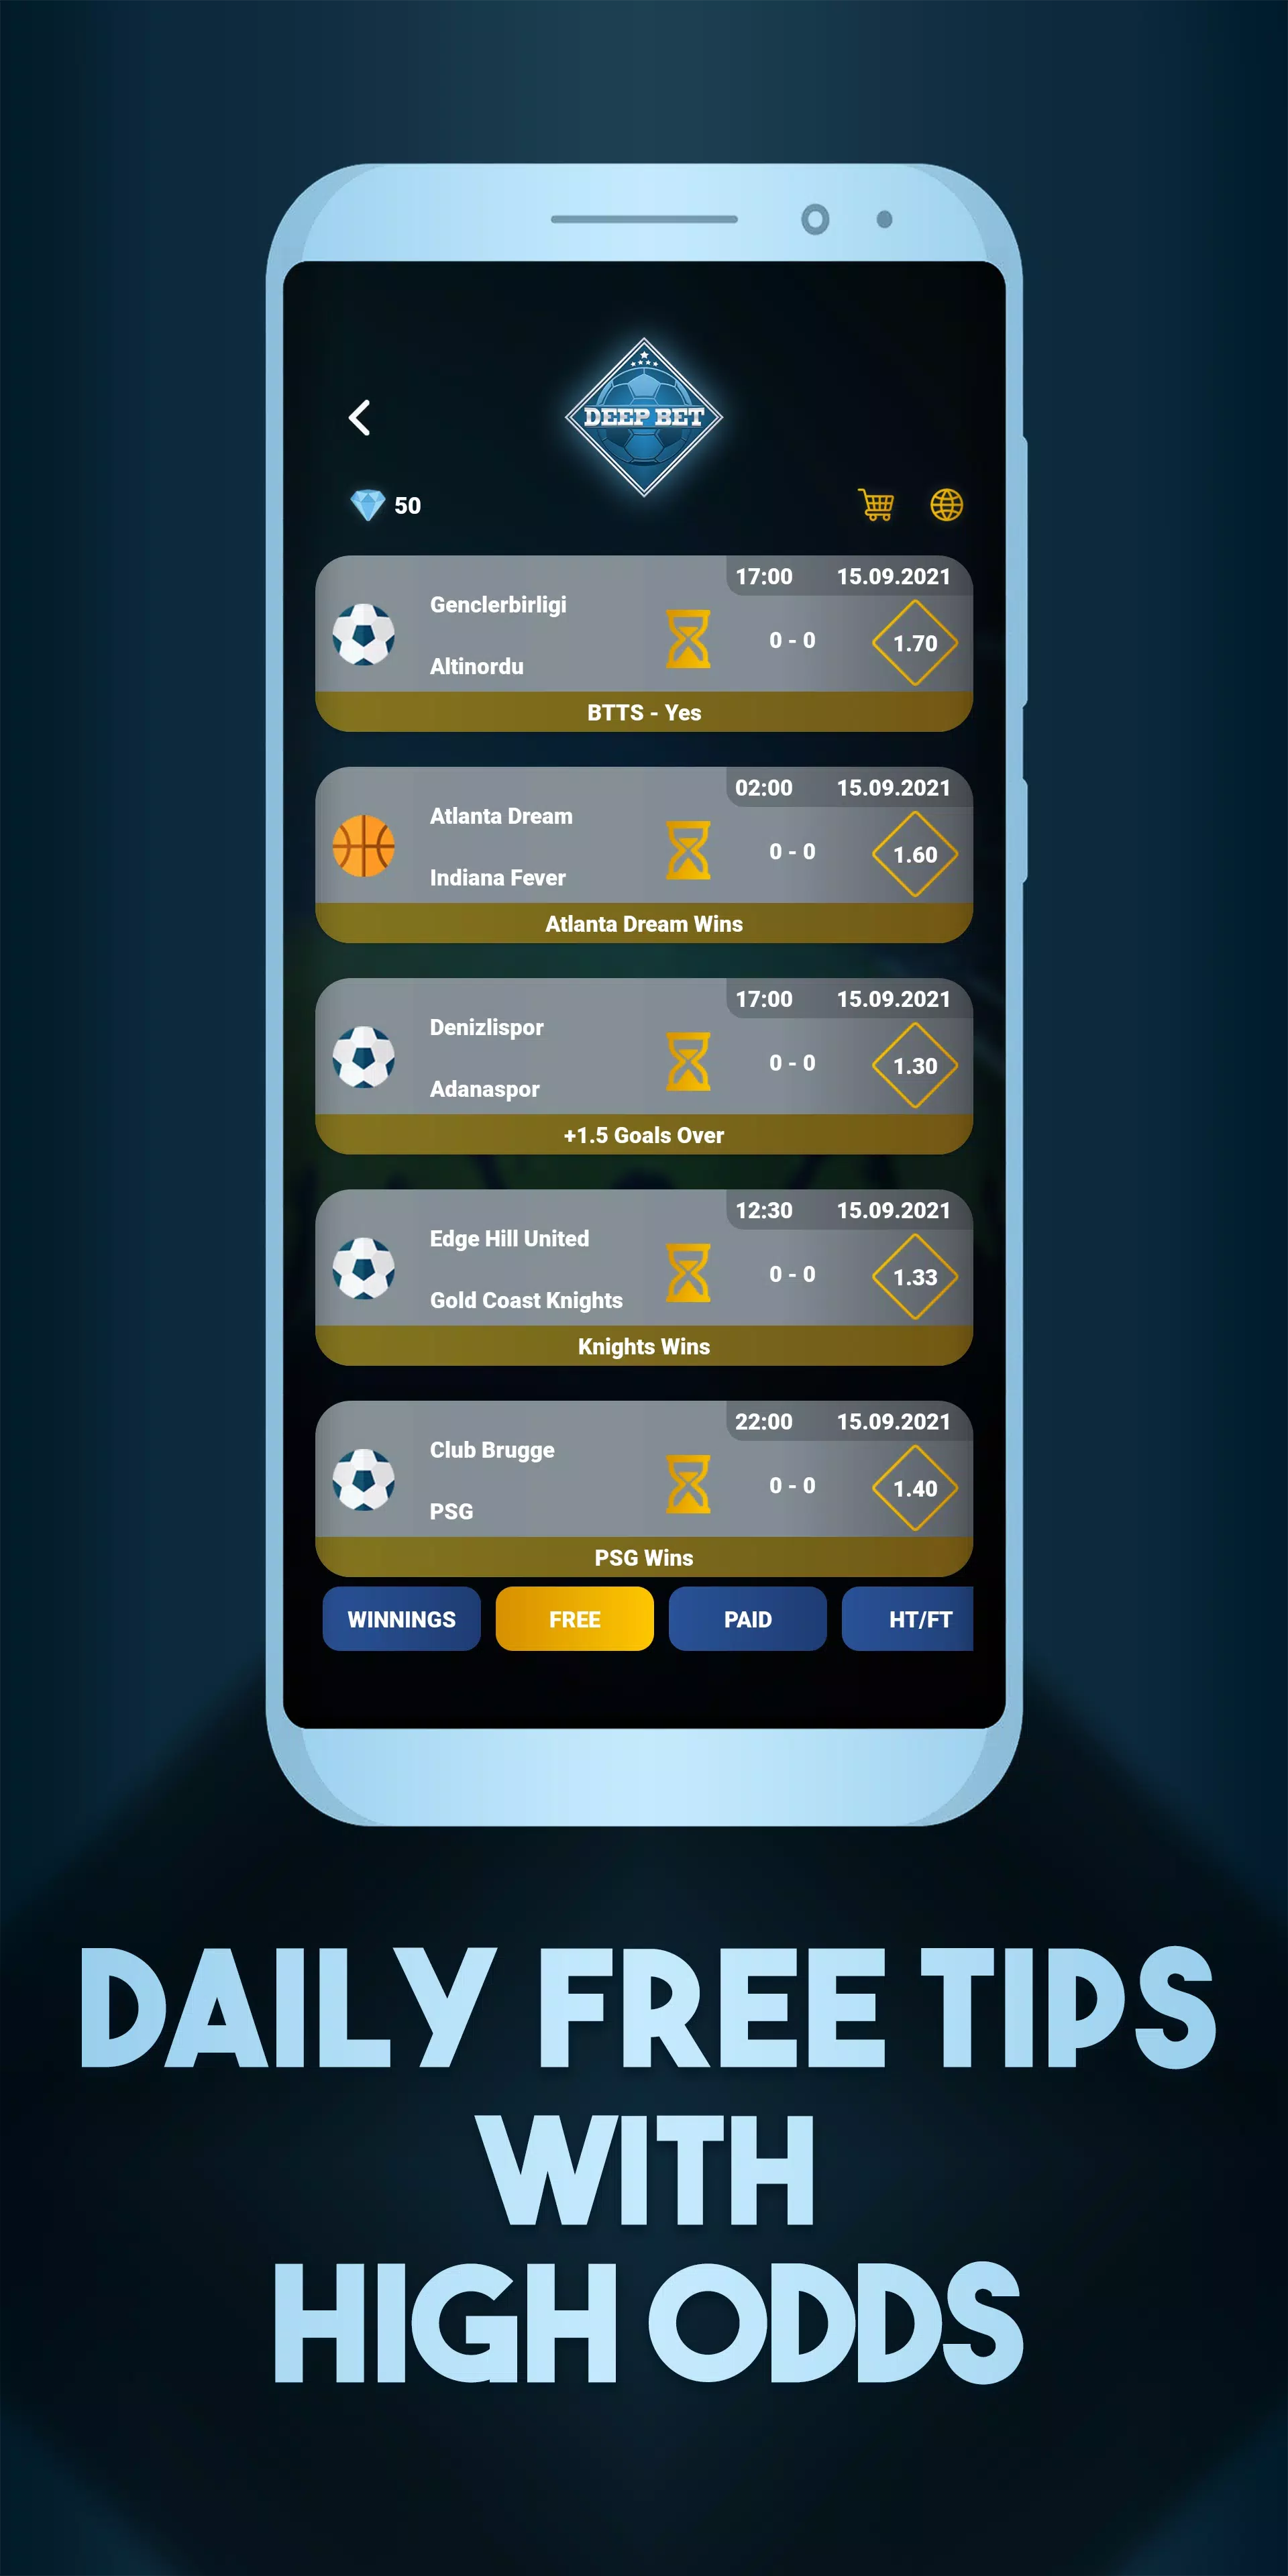 Betting Tips APK for Android Download